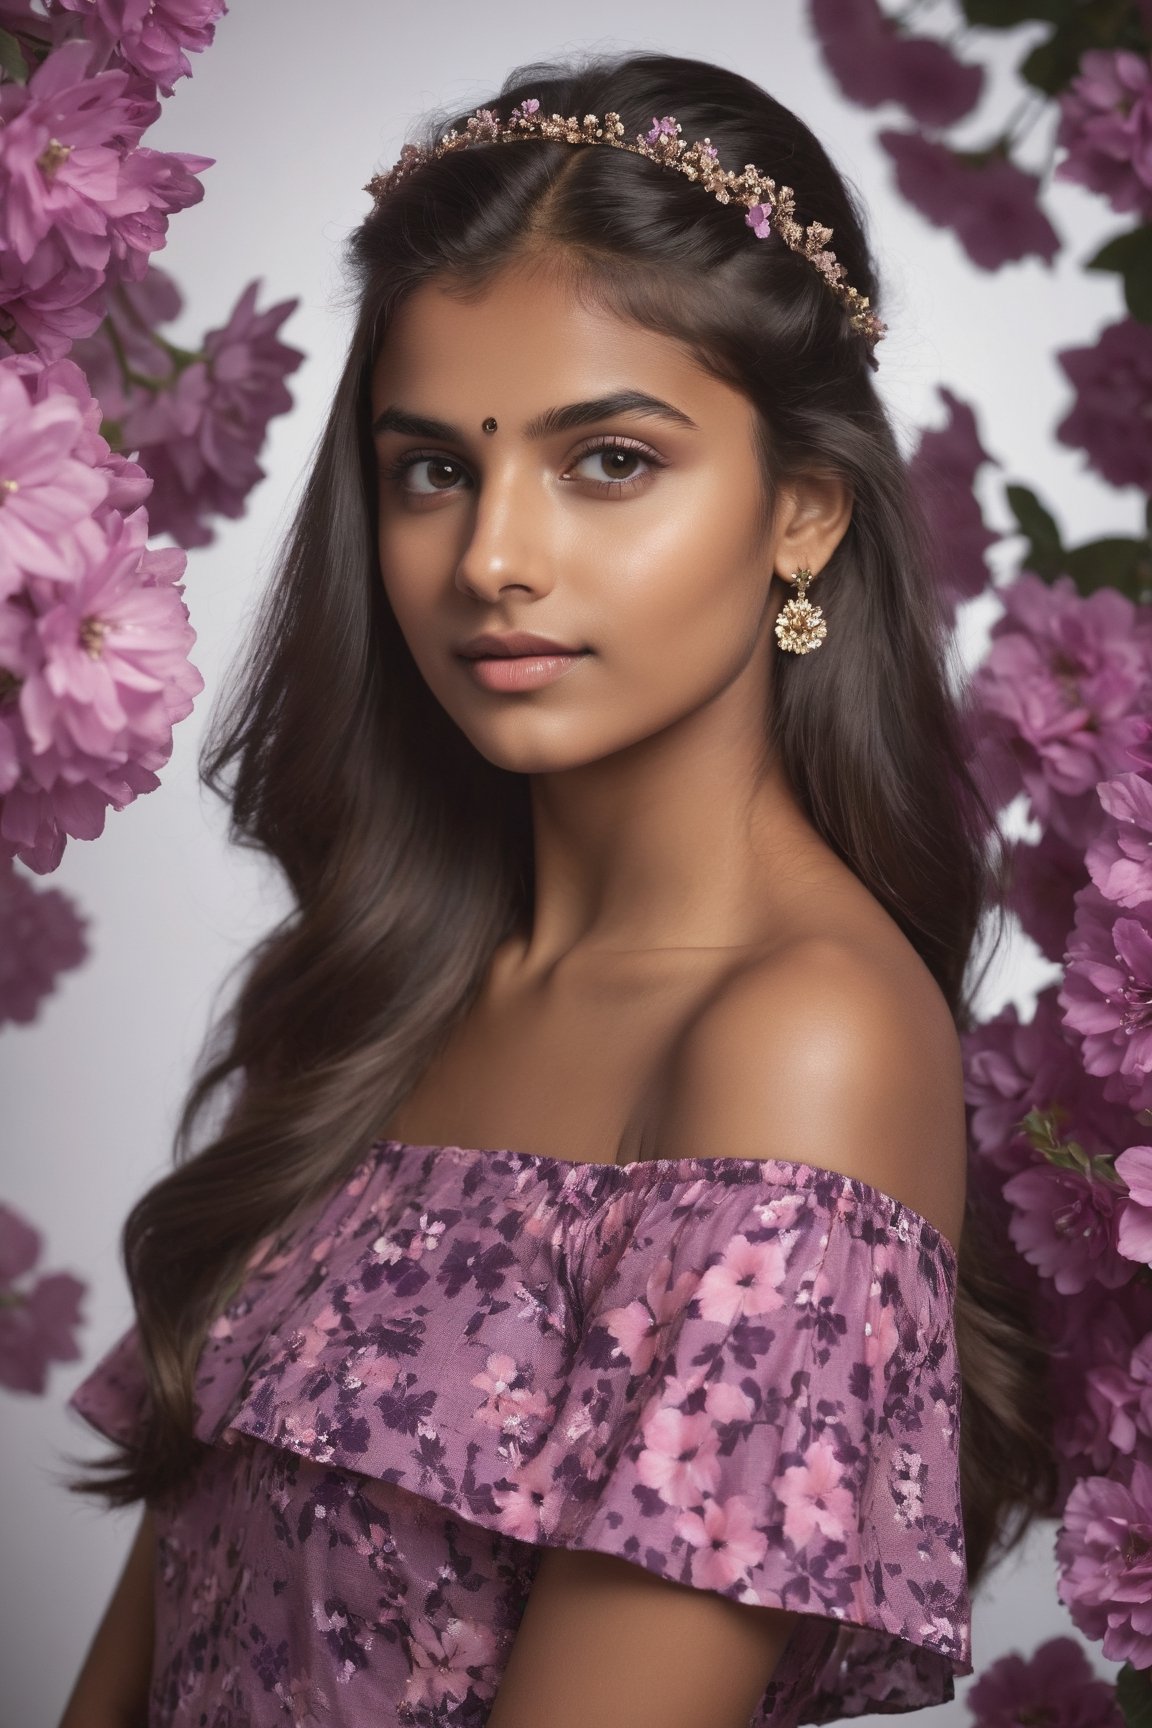 Indian Girl, 20 year old, Hasselblad Award Winner, 50mm, a very cute finnish girl, Diffrent modelling pose, front facing, pony hair, loving, confident, sparkling yes, Dark Brown half-up half-down hairstyle , glossy buff skin texture, sweet and tender girl, adorable face, warm light, half sleeve pink dress with purple flowers Print,